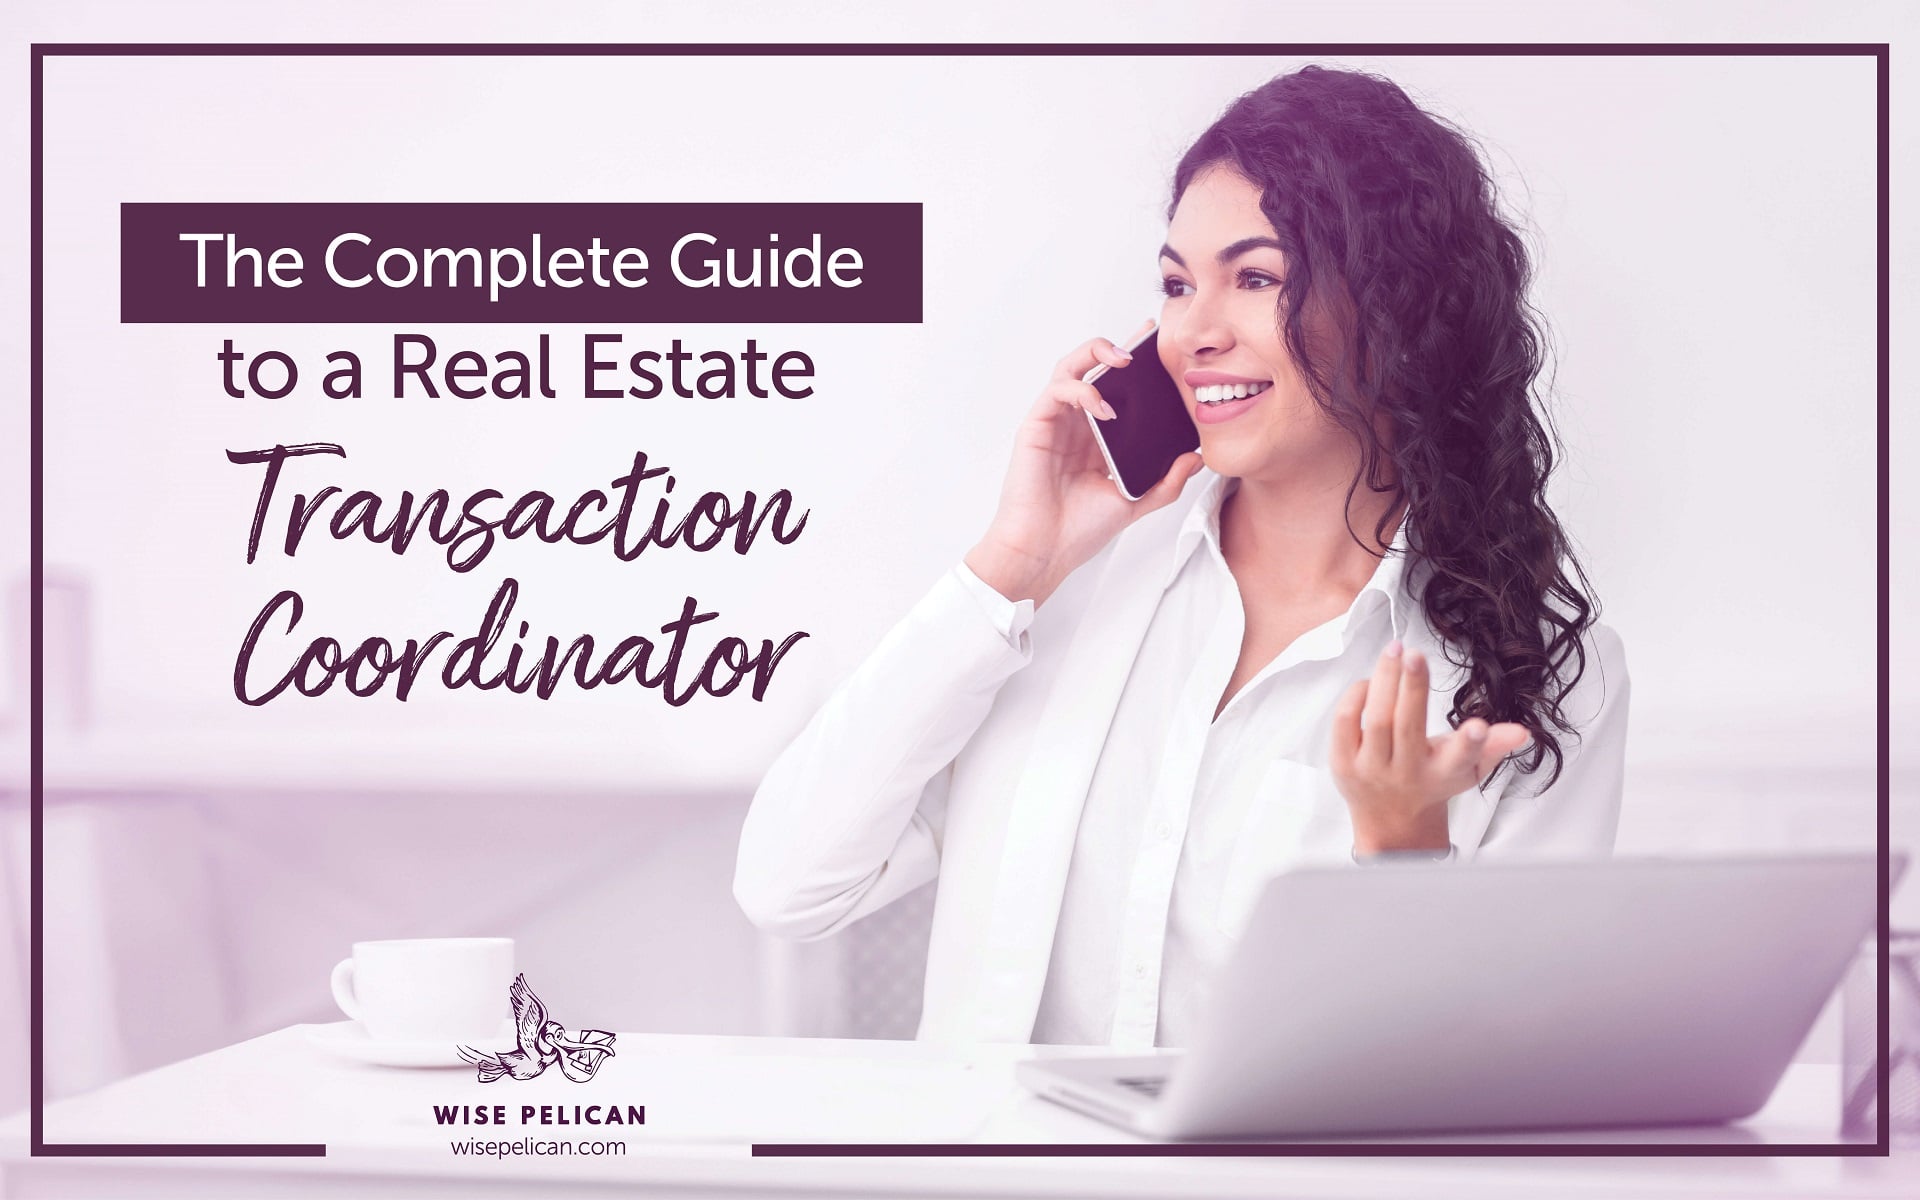 Guide to Real Estate Transaction Coordinator